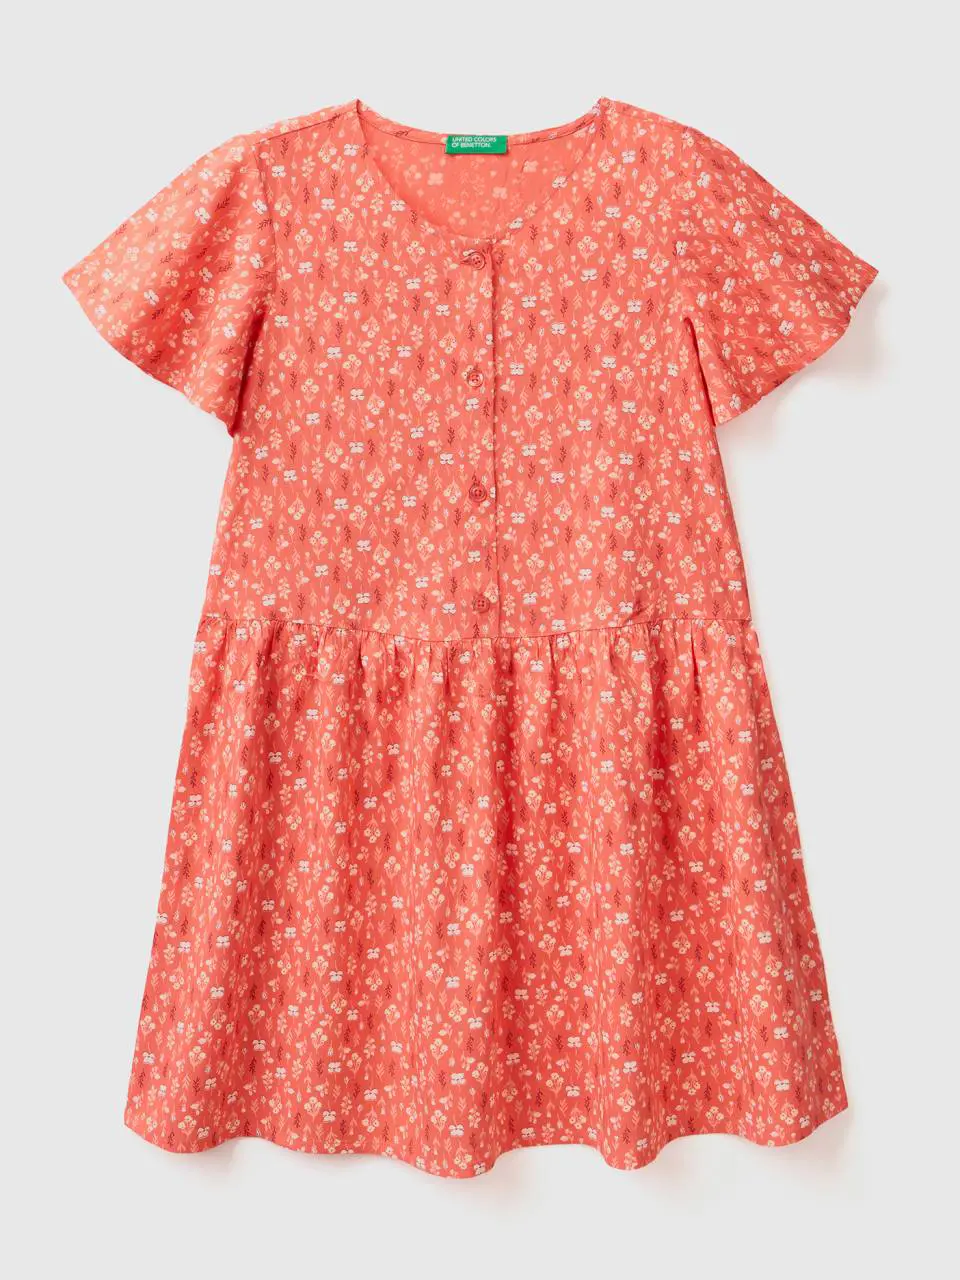 Benetton floral dress in sustainable viscose. 1